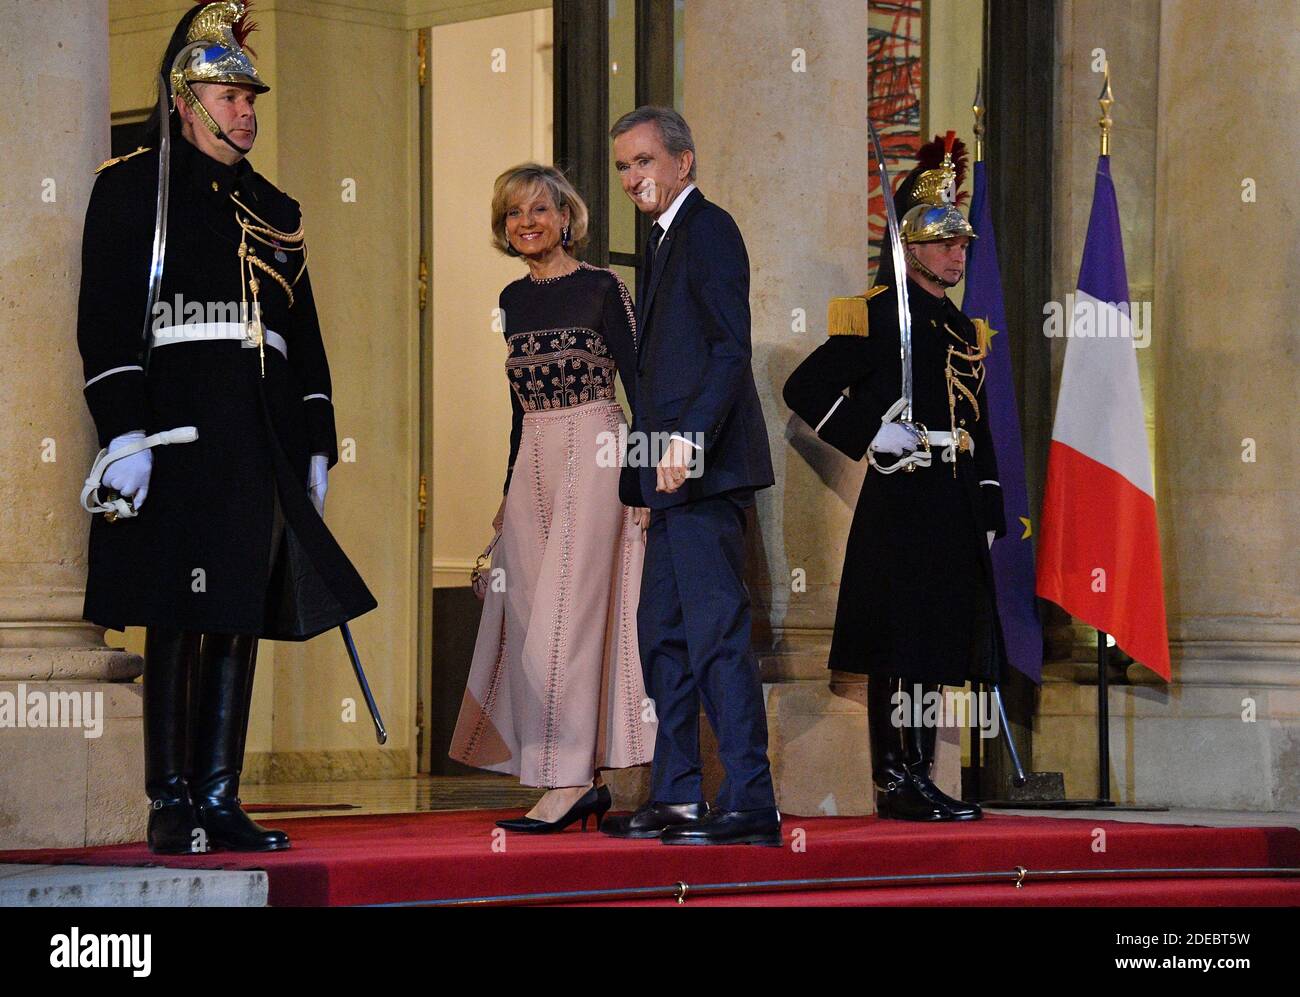 Bernard arnault and wife hi-res stock photography and images - Alamy